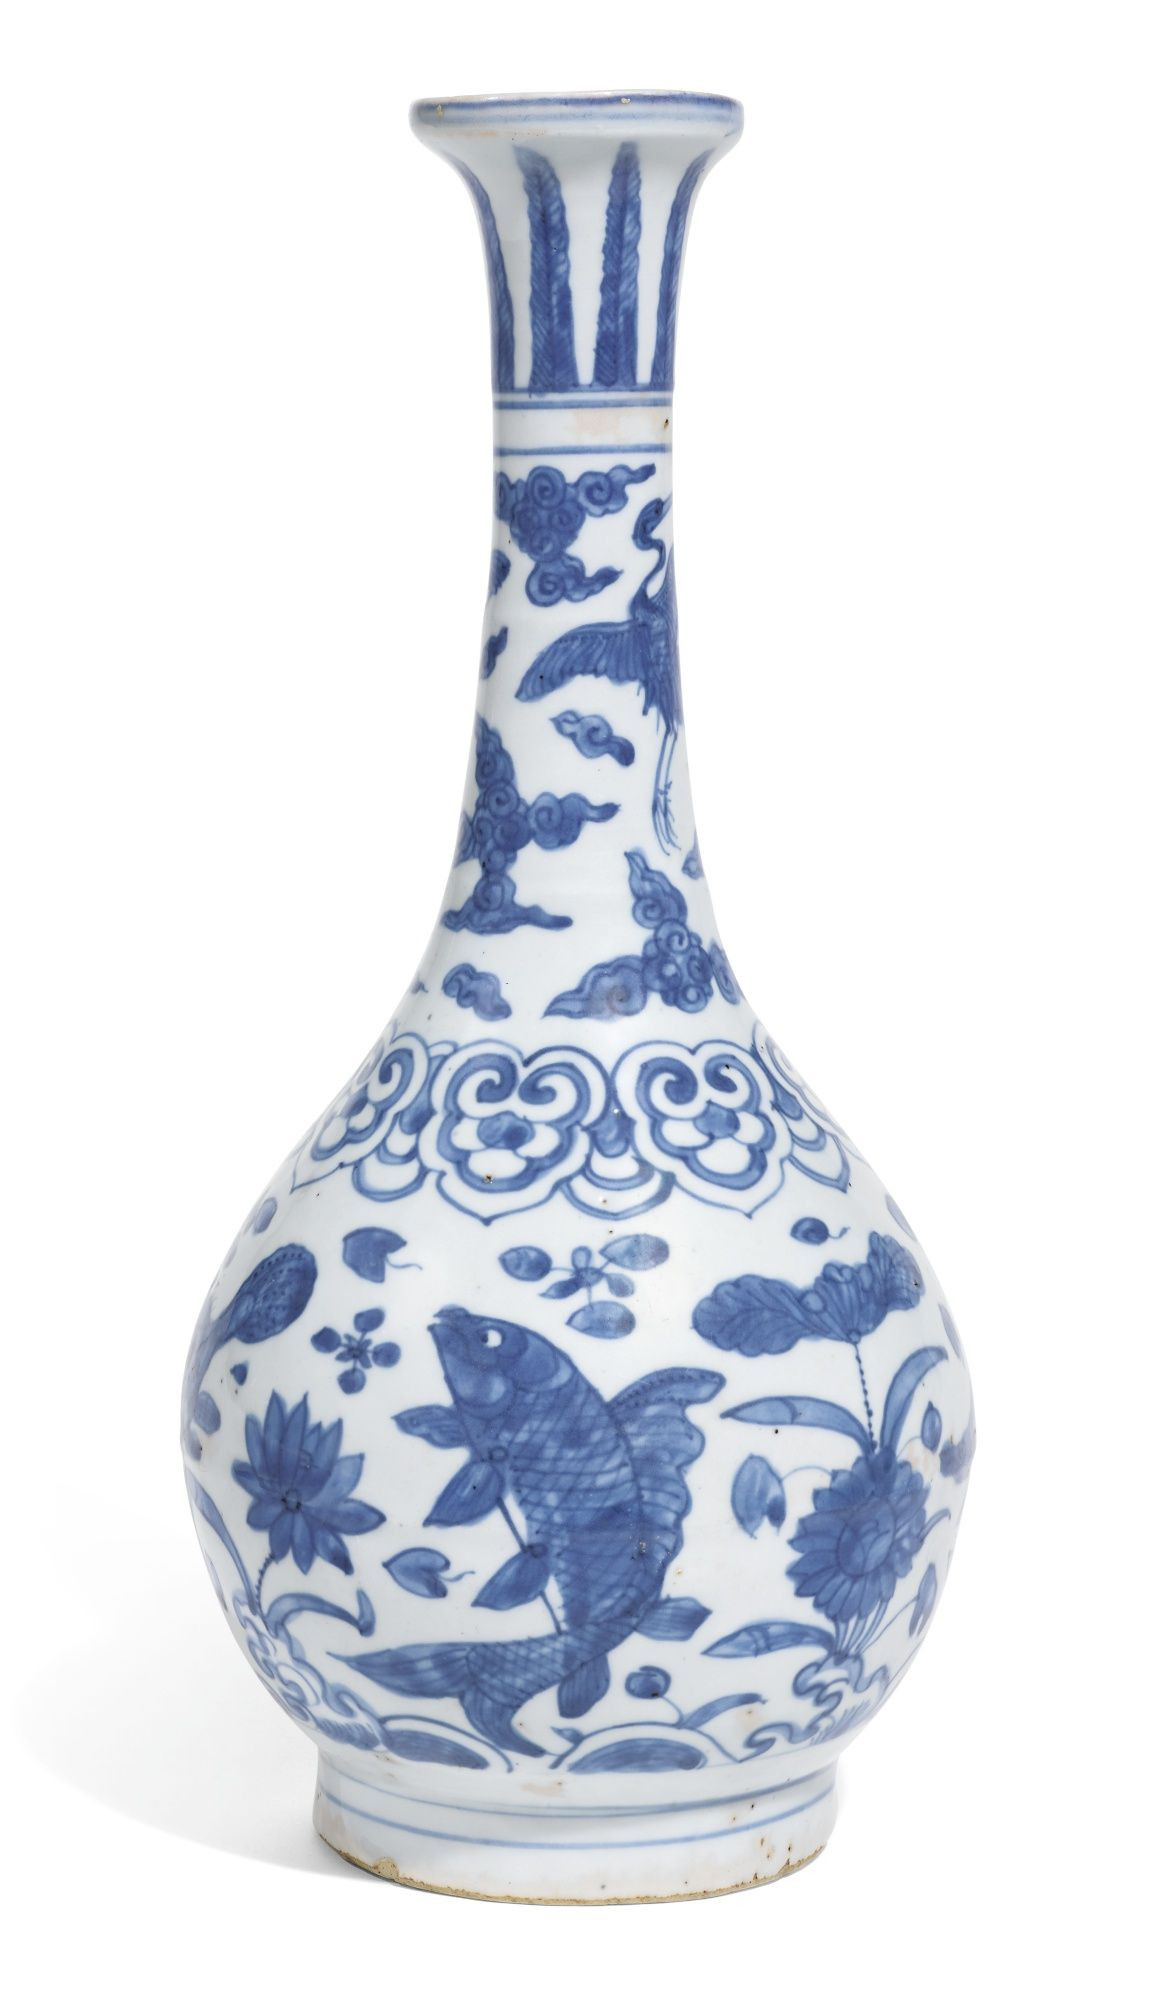 13 Cute Double Gourd Vase 2024 free download double gourd vase of a blue and white bottle vase ming dynasty jiajing wanli period for a blue and white bottle vase ming dynasty jiajing wanli period